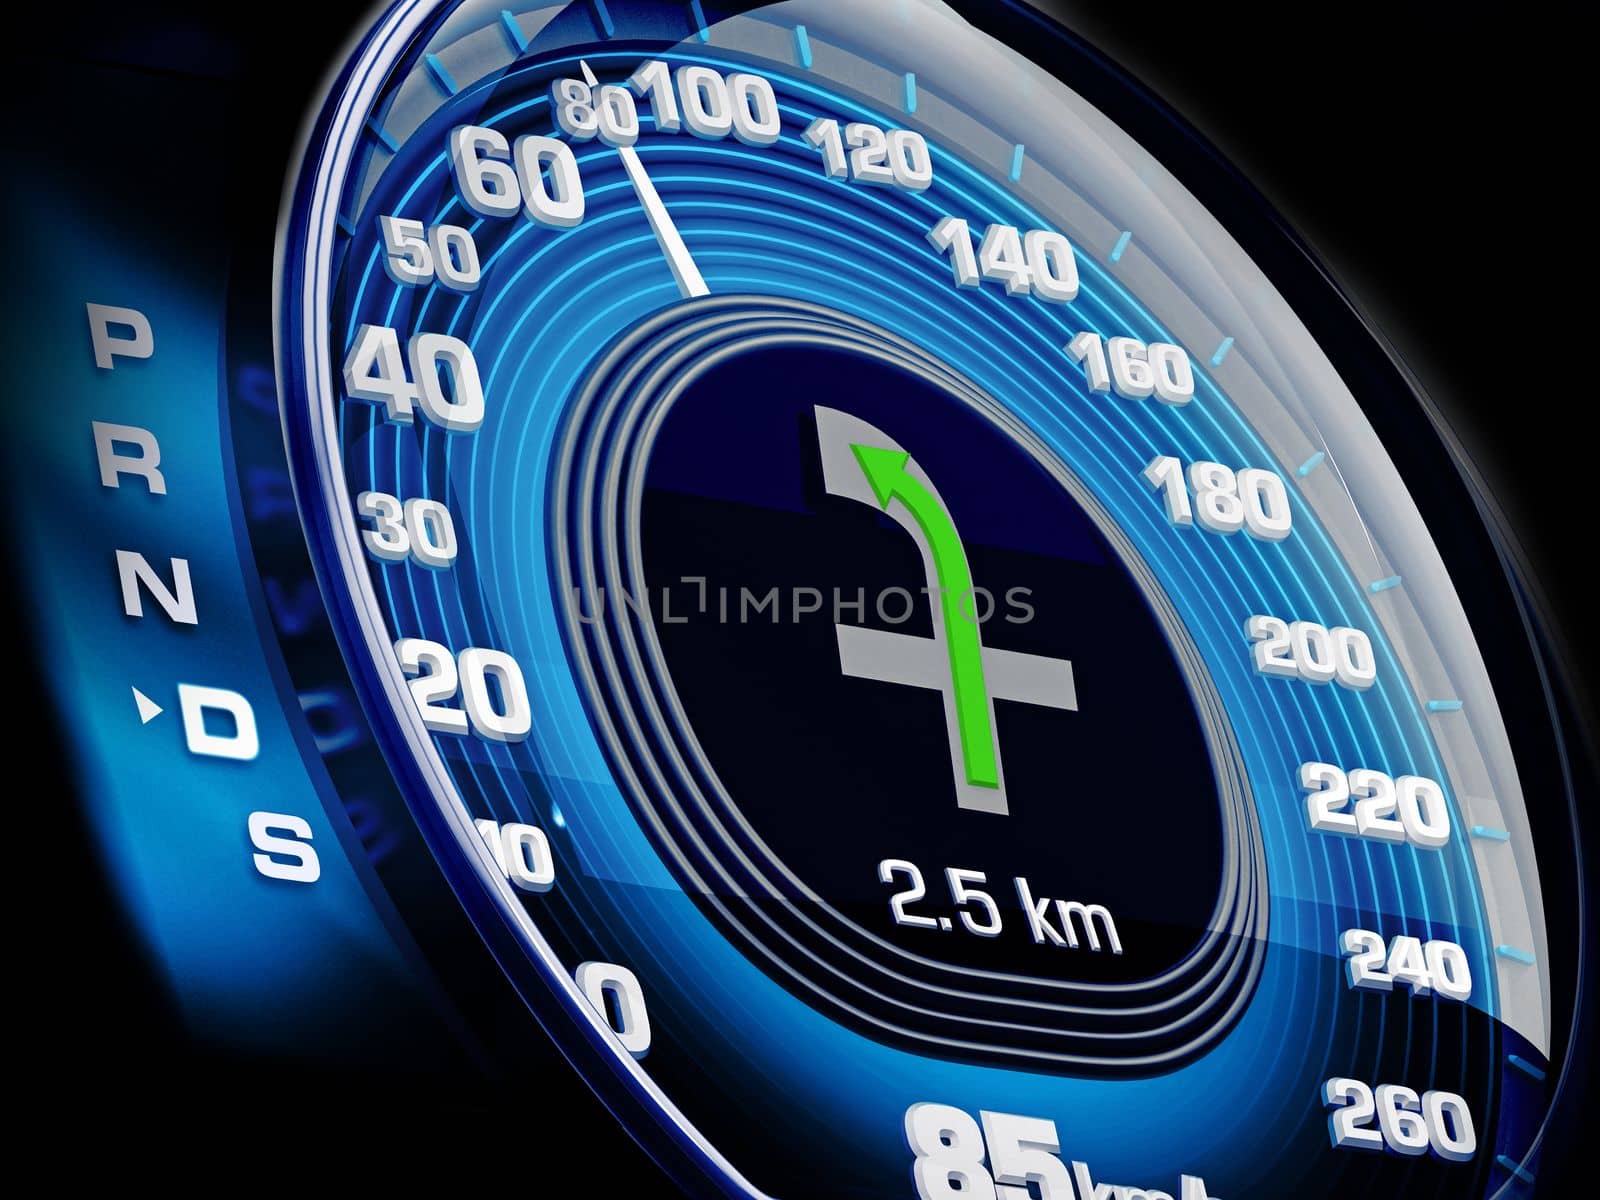 Modern speedometer of a car with navigation screen. 3D illustration by Simsek